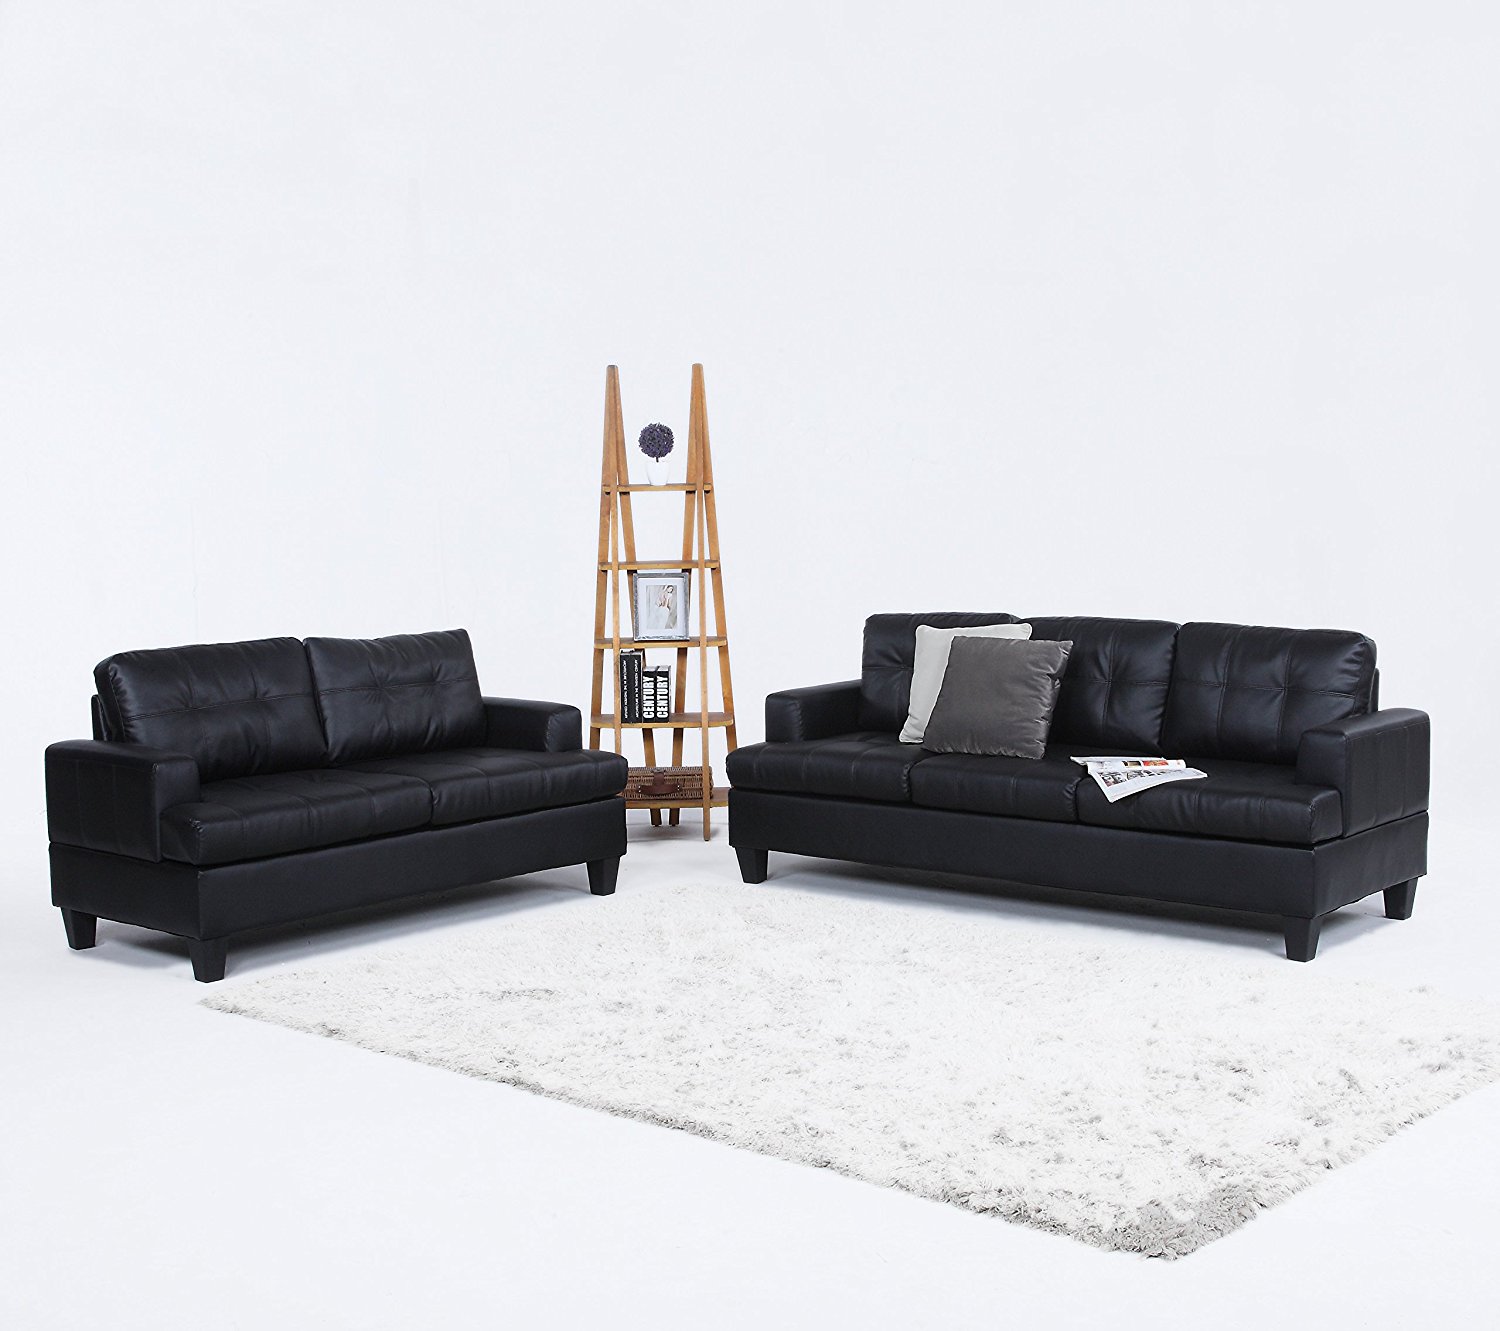 2 Piece Modern Black Bonded Leather Sofa and Love Seat Set